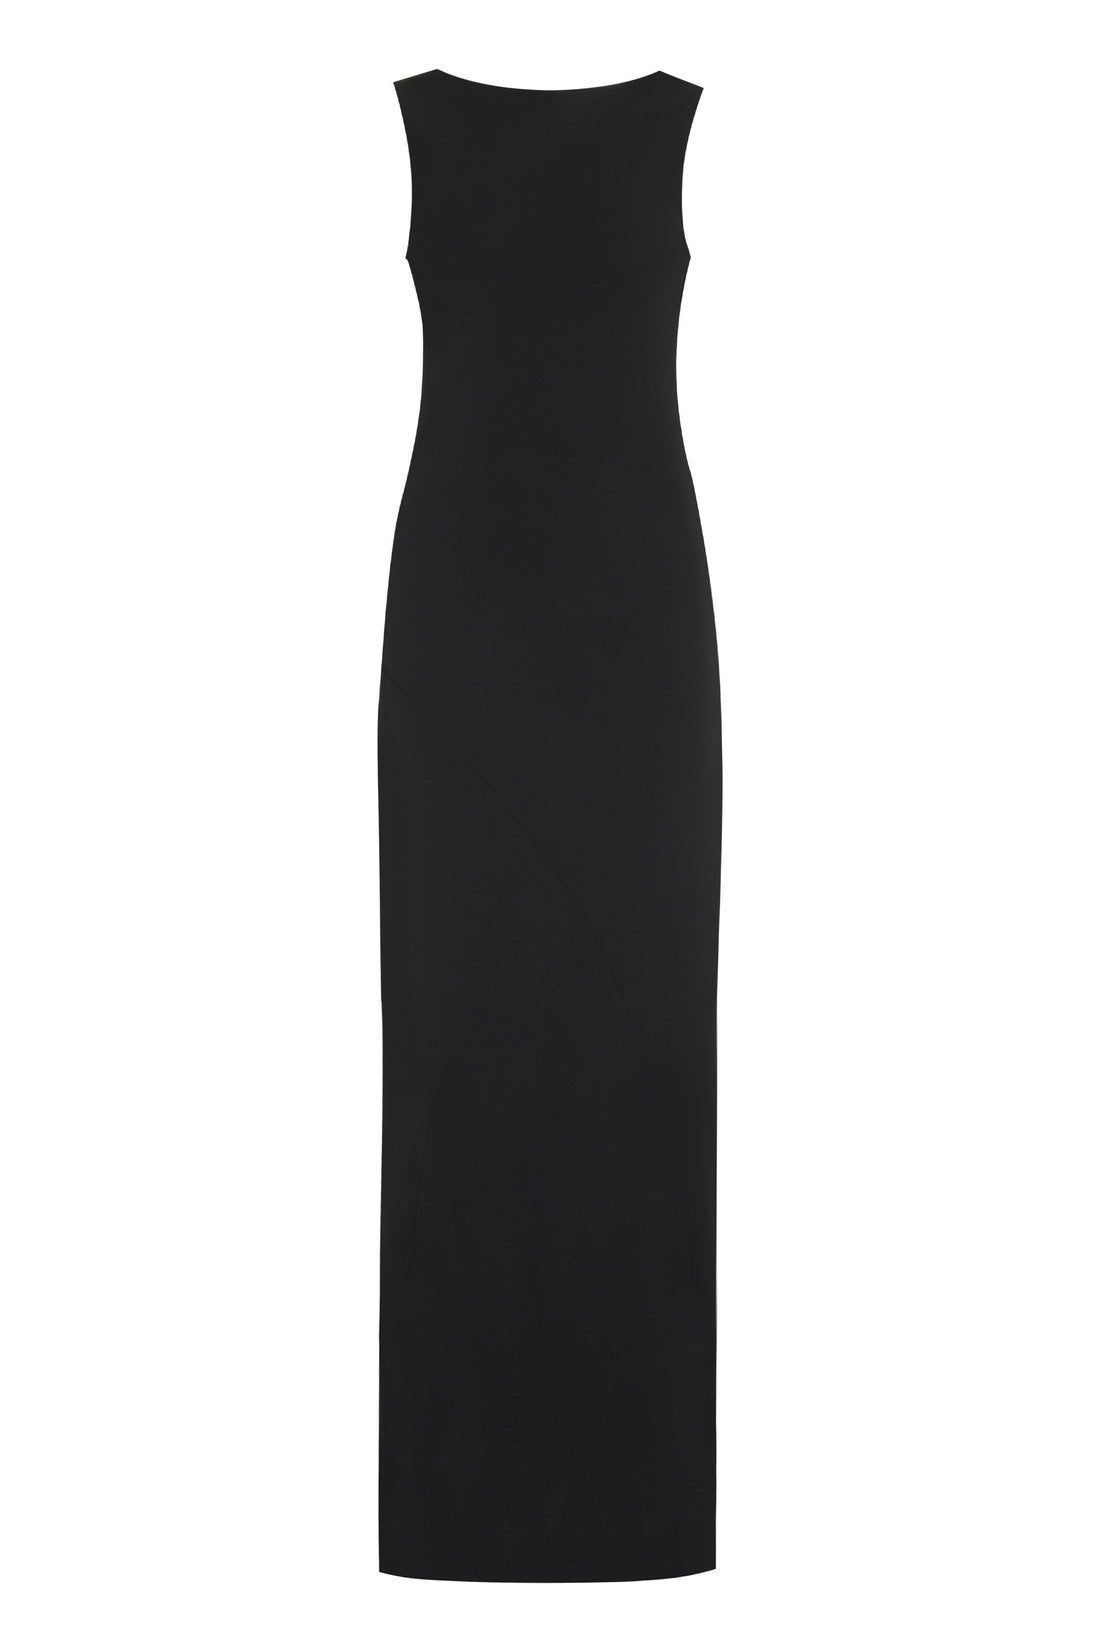 CALVIN KLEIN-OUTLET-SALE-Knitted maxi dress-ARCHIVIST